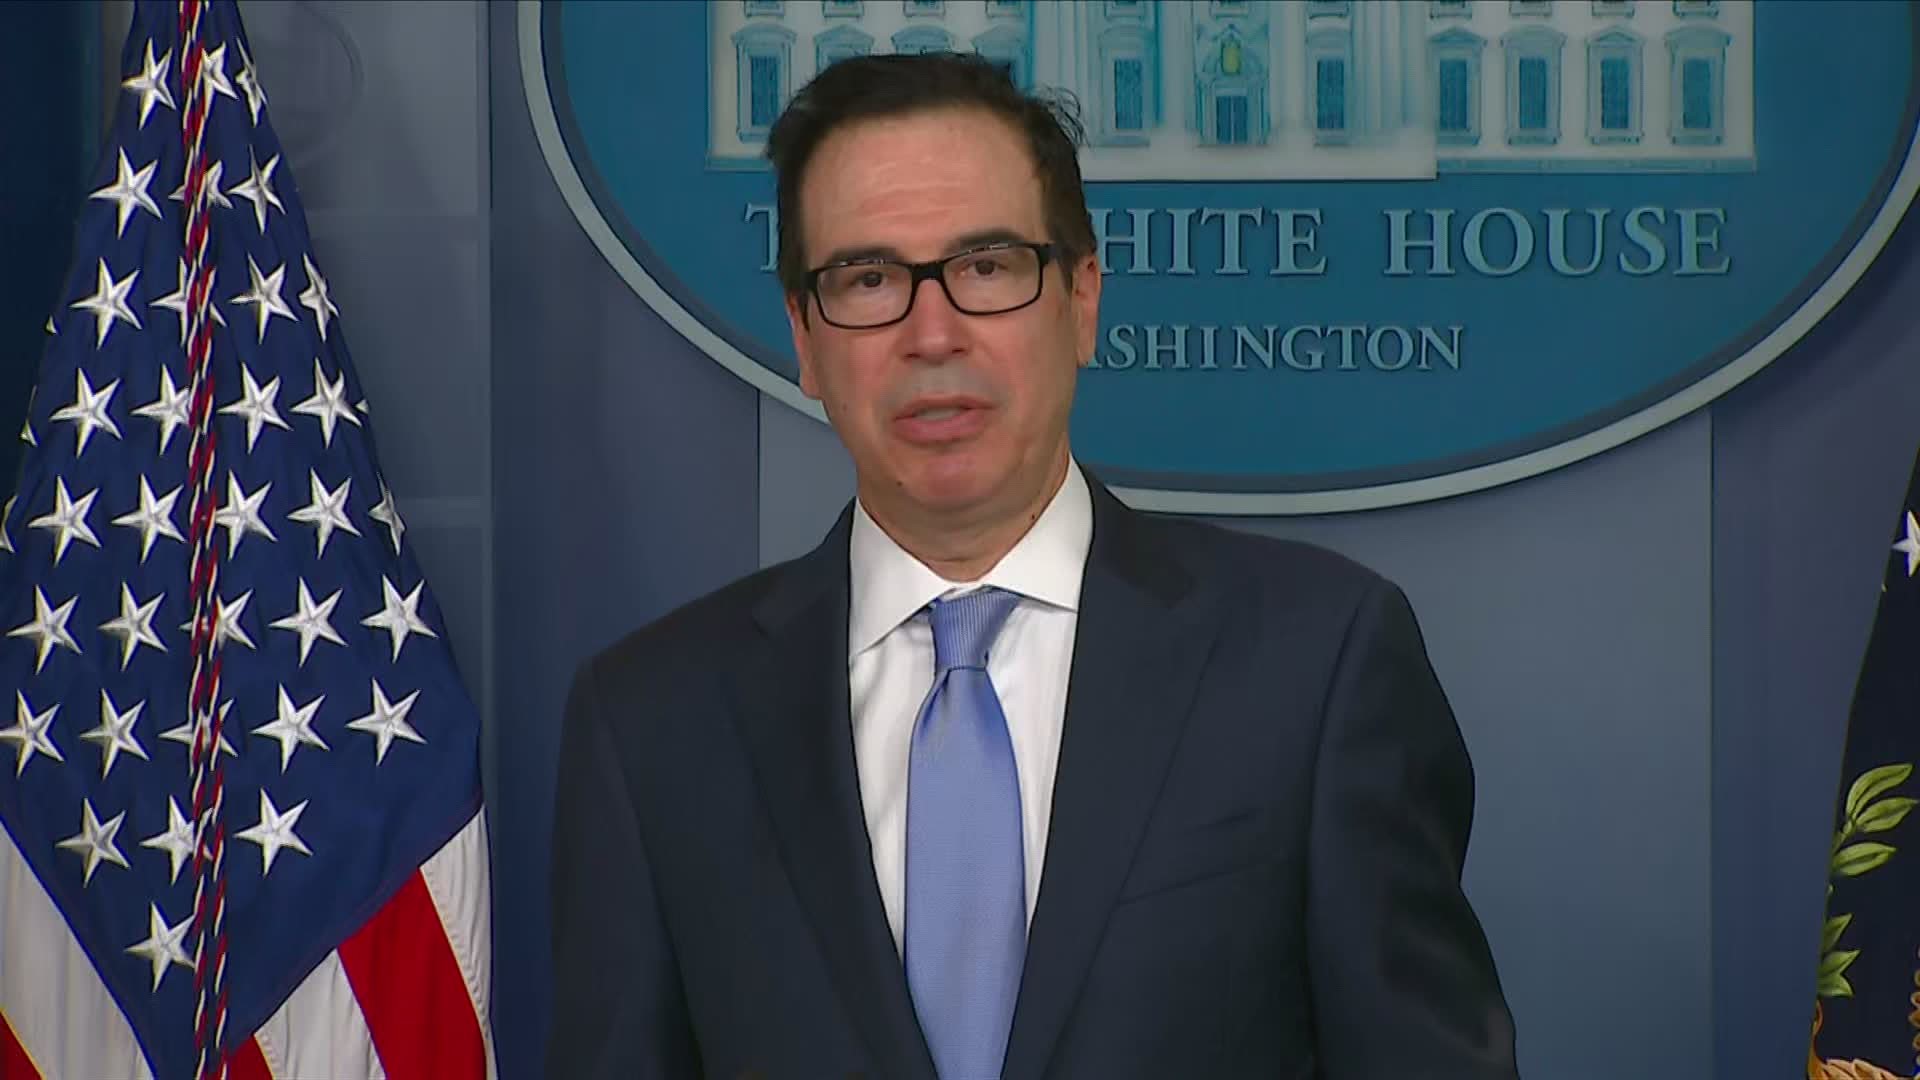 Treasury Secretary Steven Mnuchin said Thursday that more direct payments to Americans could be a part of the next round of coronavirus stimulus aid.